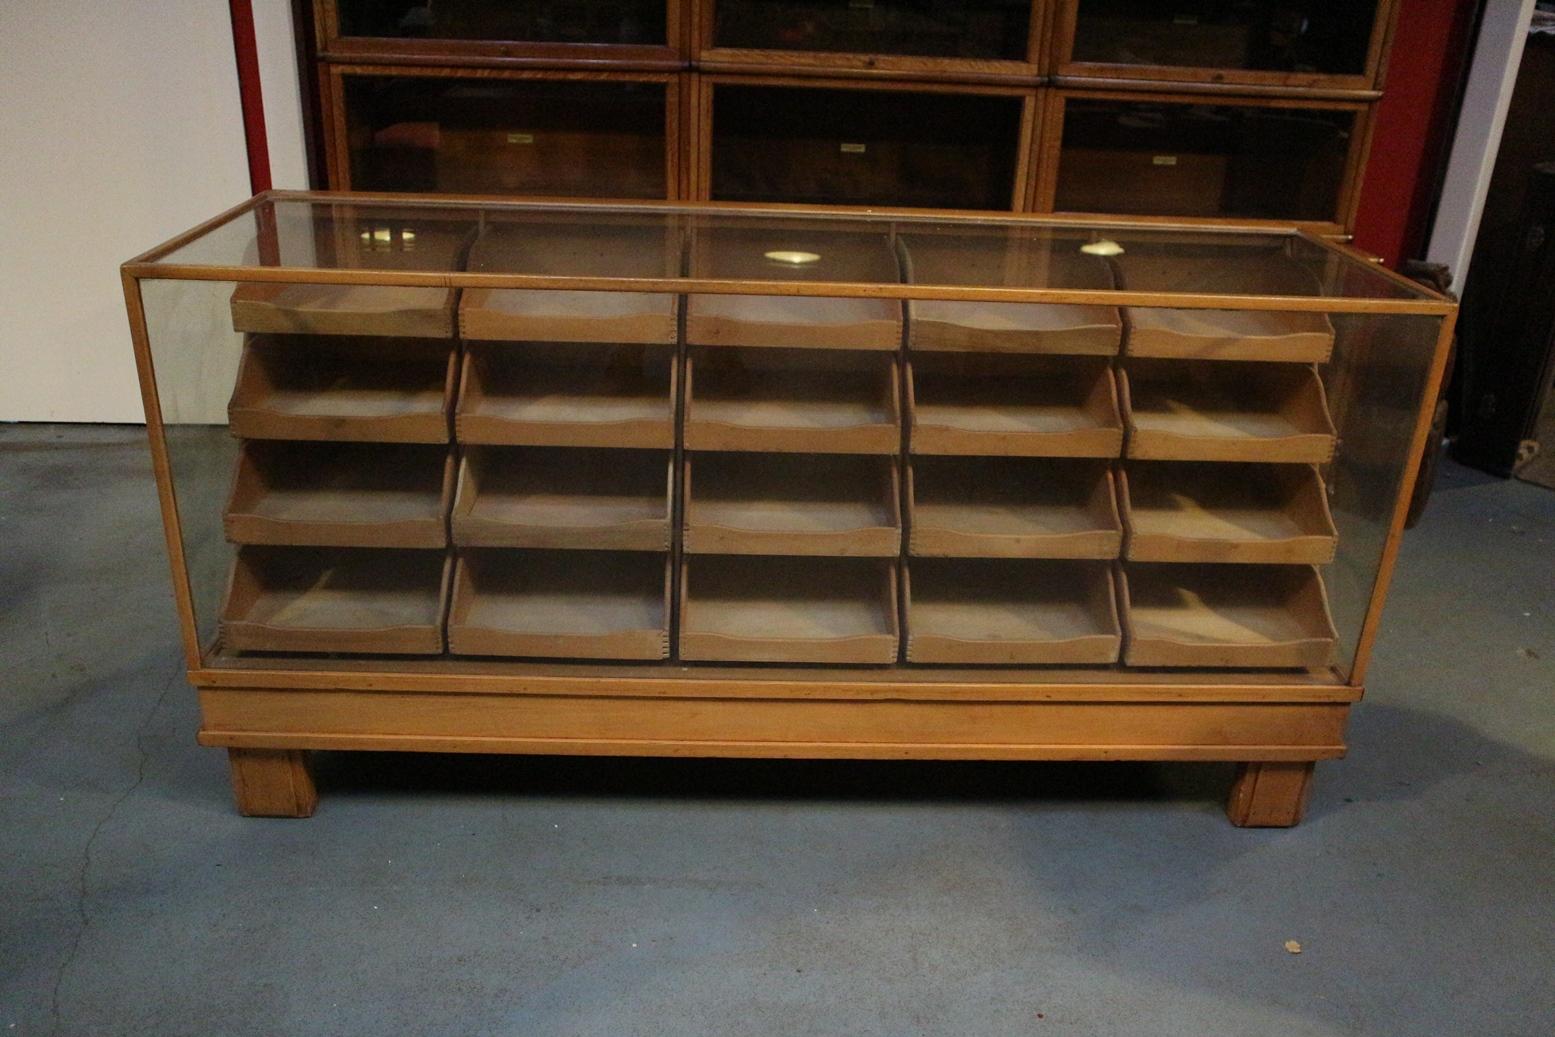 Old beech wood counter display case with 20 drawers. Counter is in good and original condition.
Origin: England
Period: circa 1920-1940
Size: 181cm x 48cm x h. 91cm.